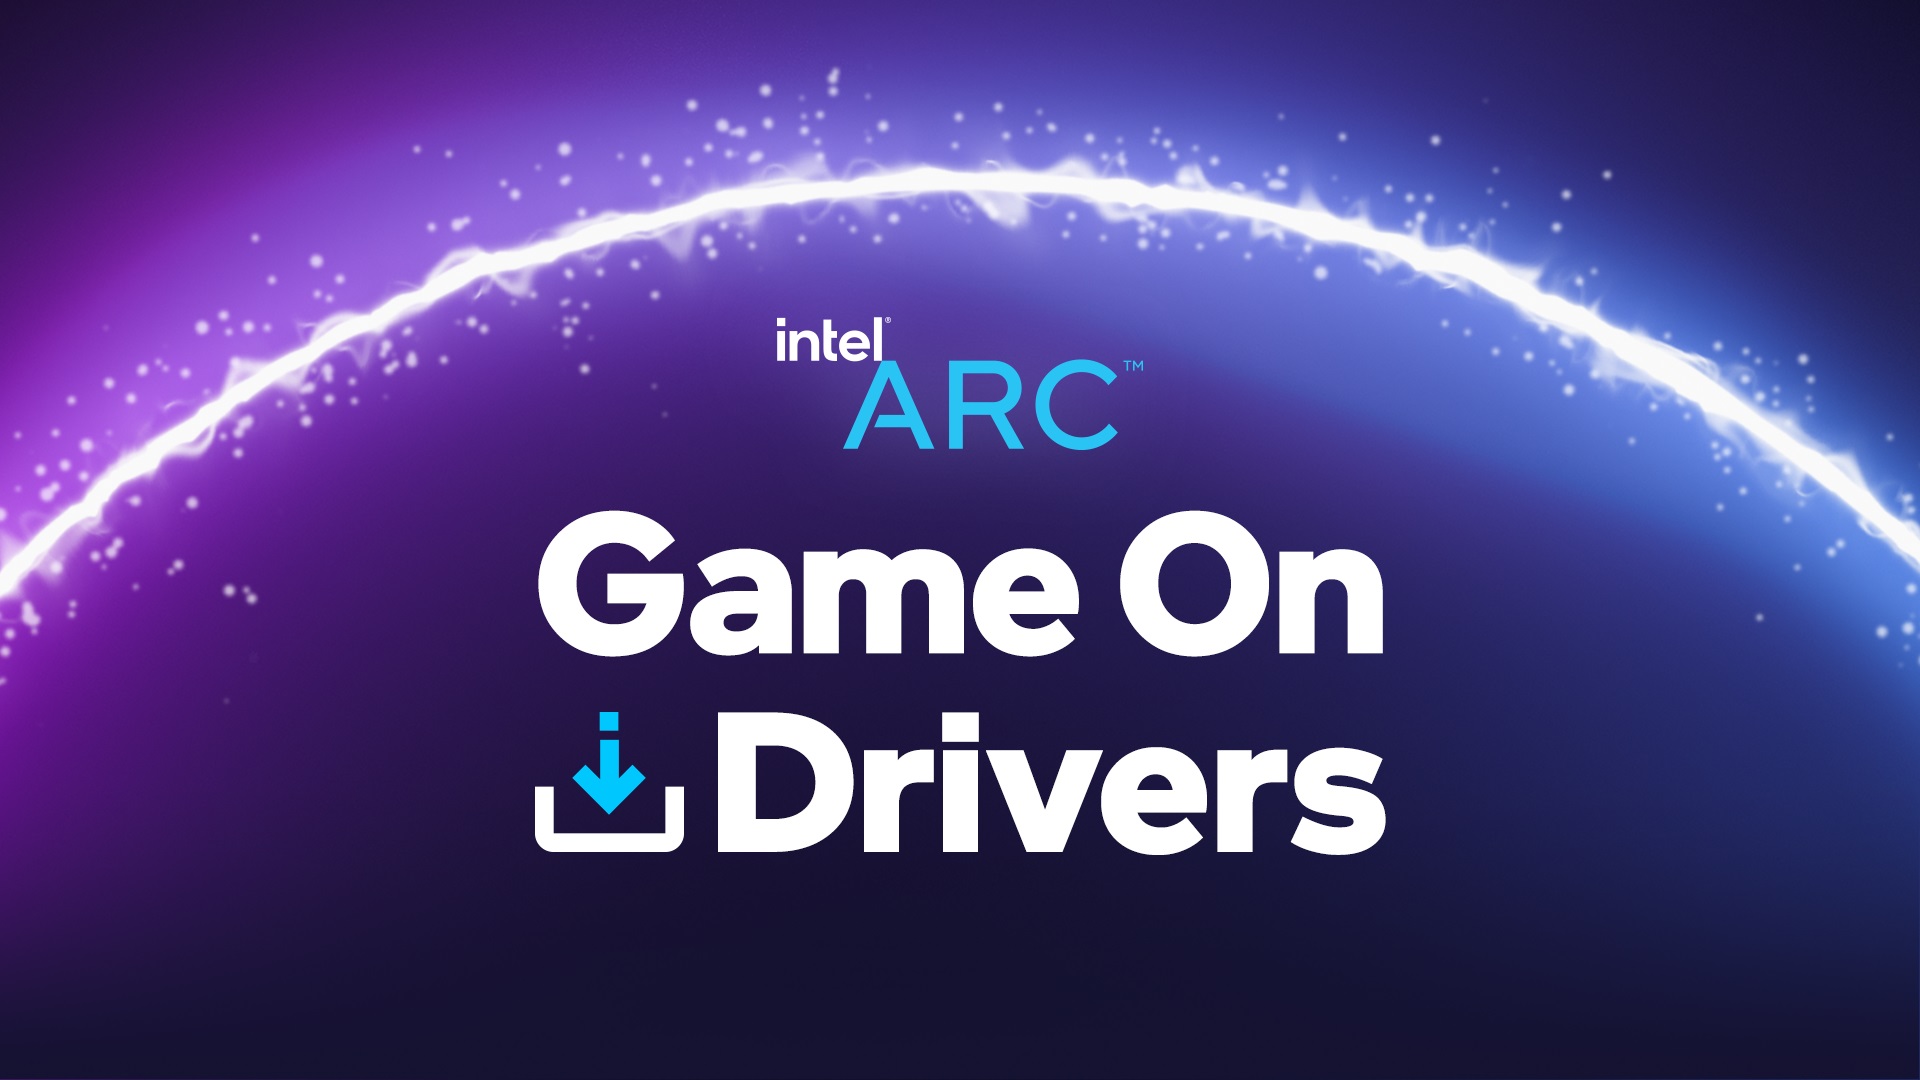 The latest Intel ARC “Game On” drivers deliver 5-34% boosts across 9 games